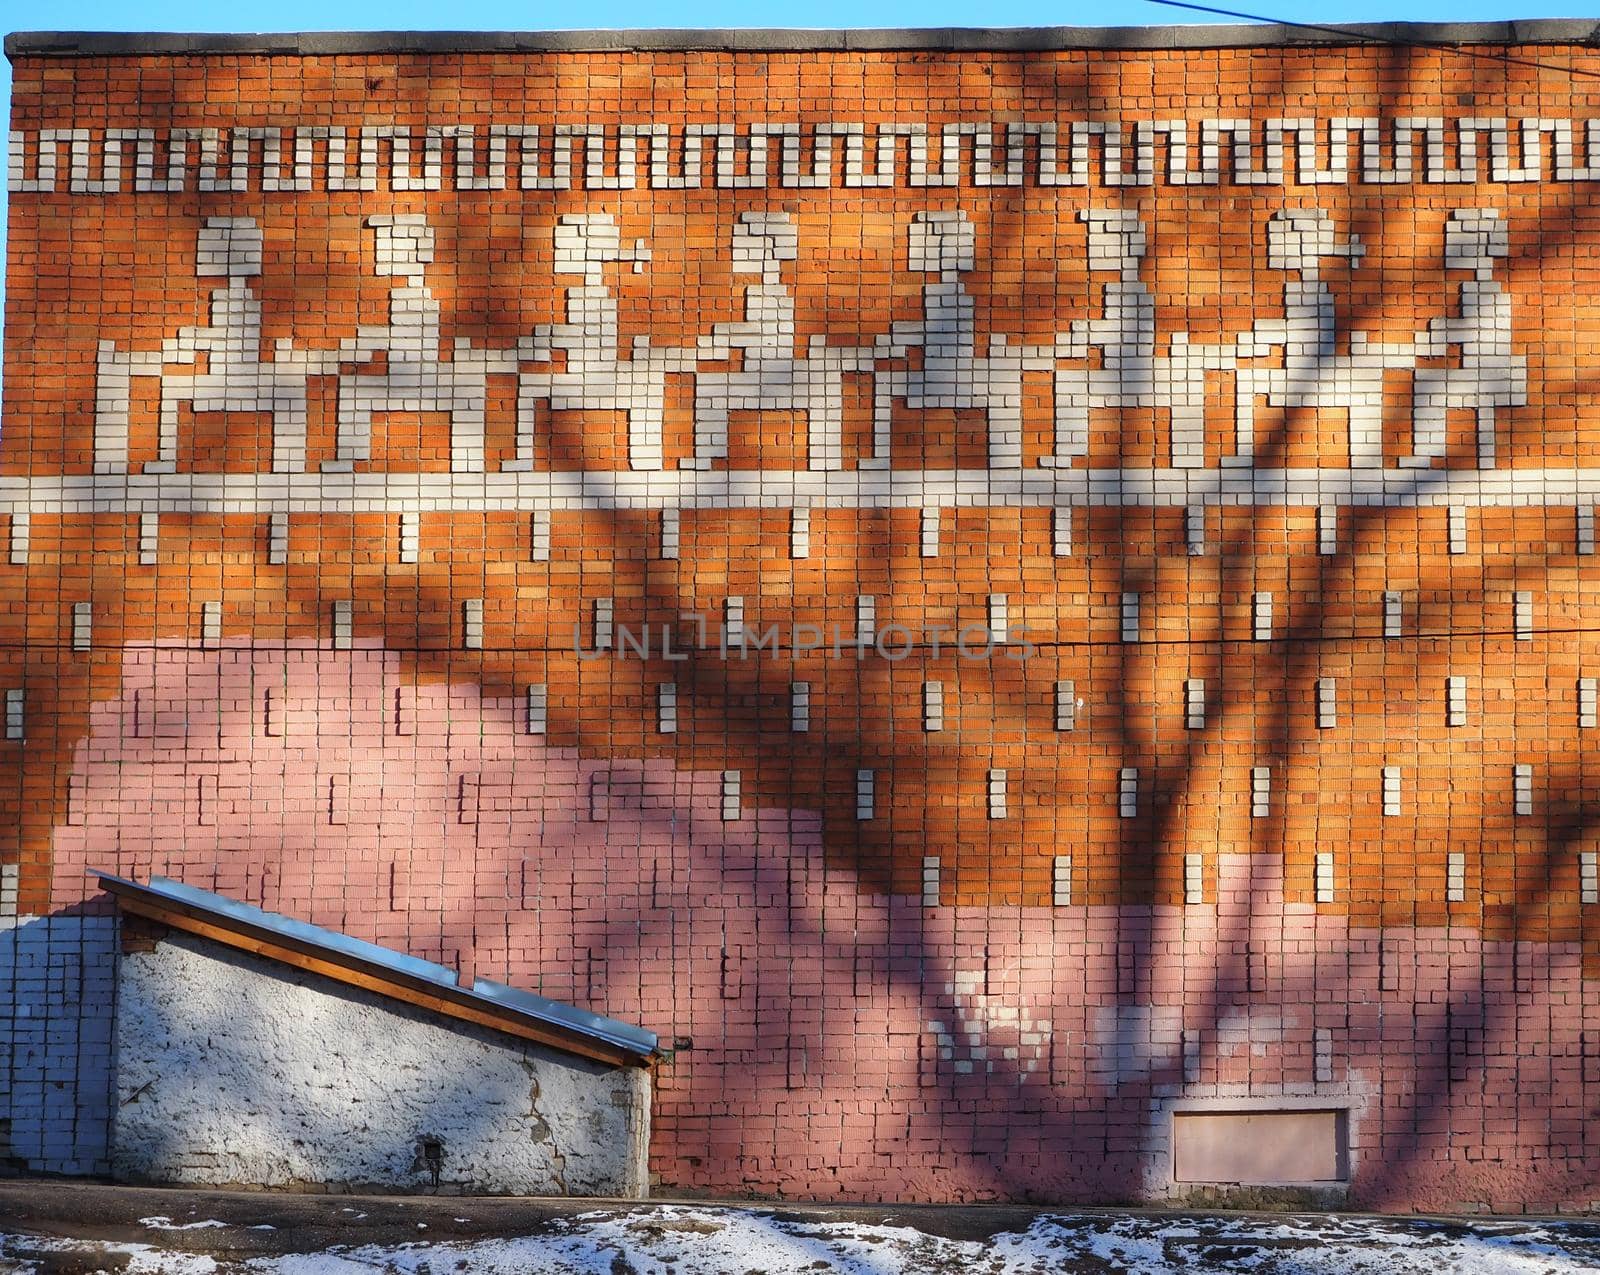 The brick wall of the school building with mosaics. High quality photo